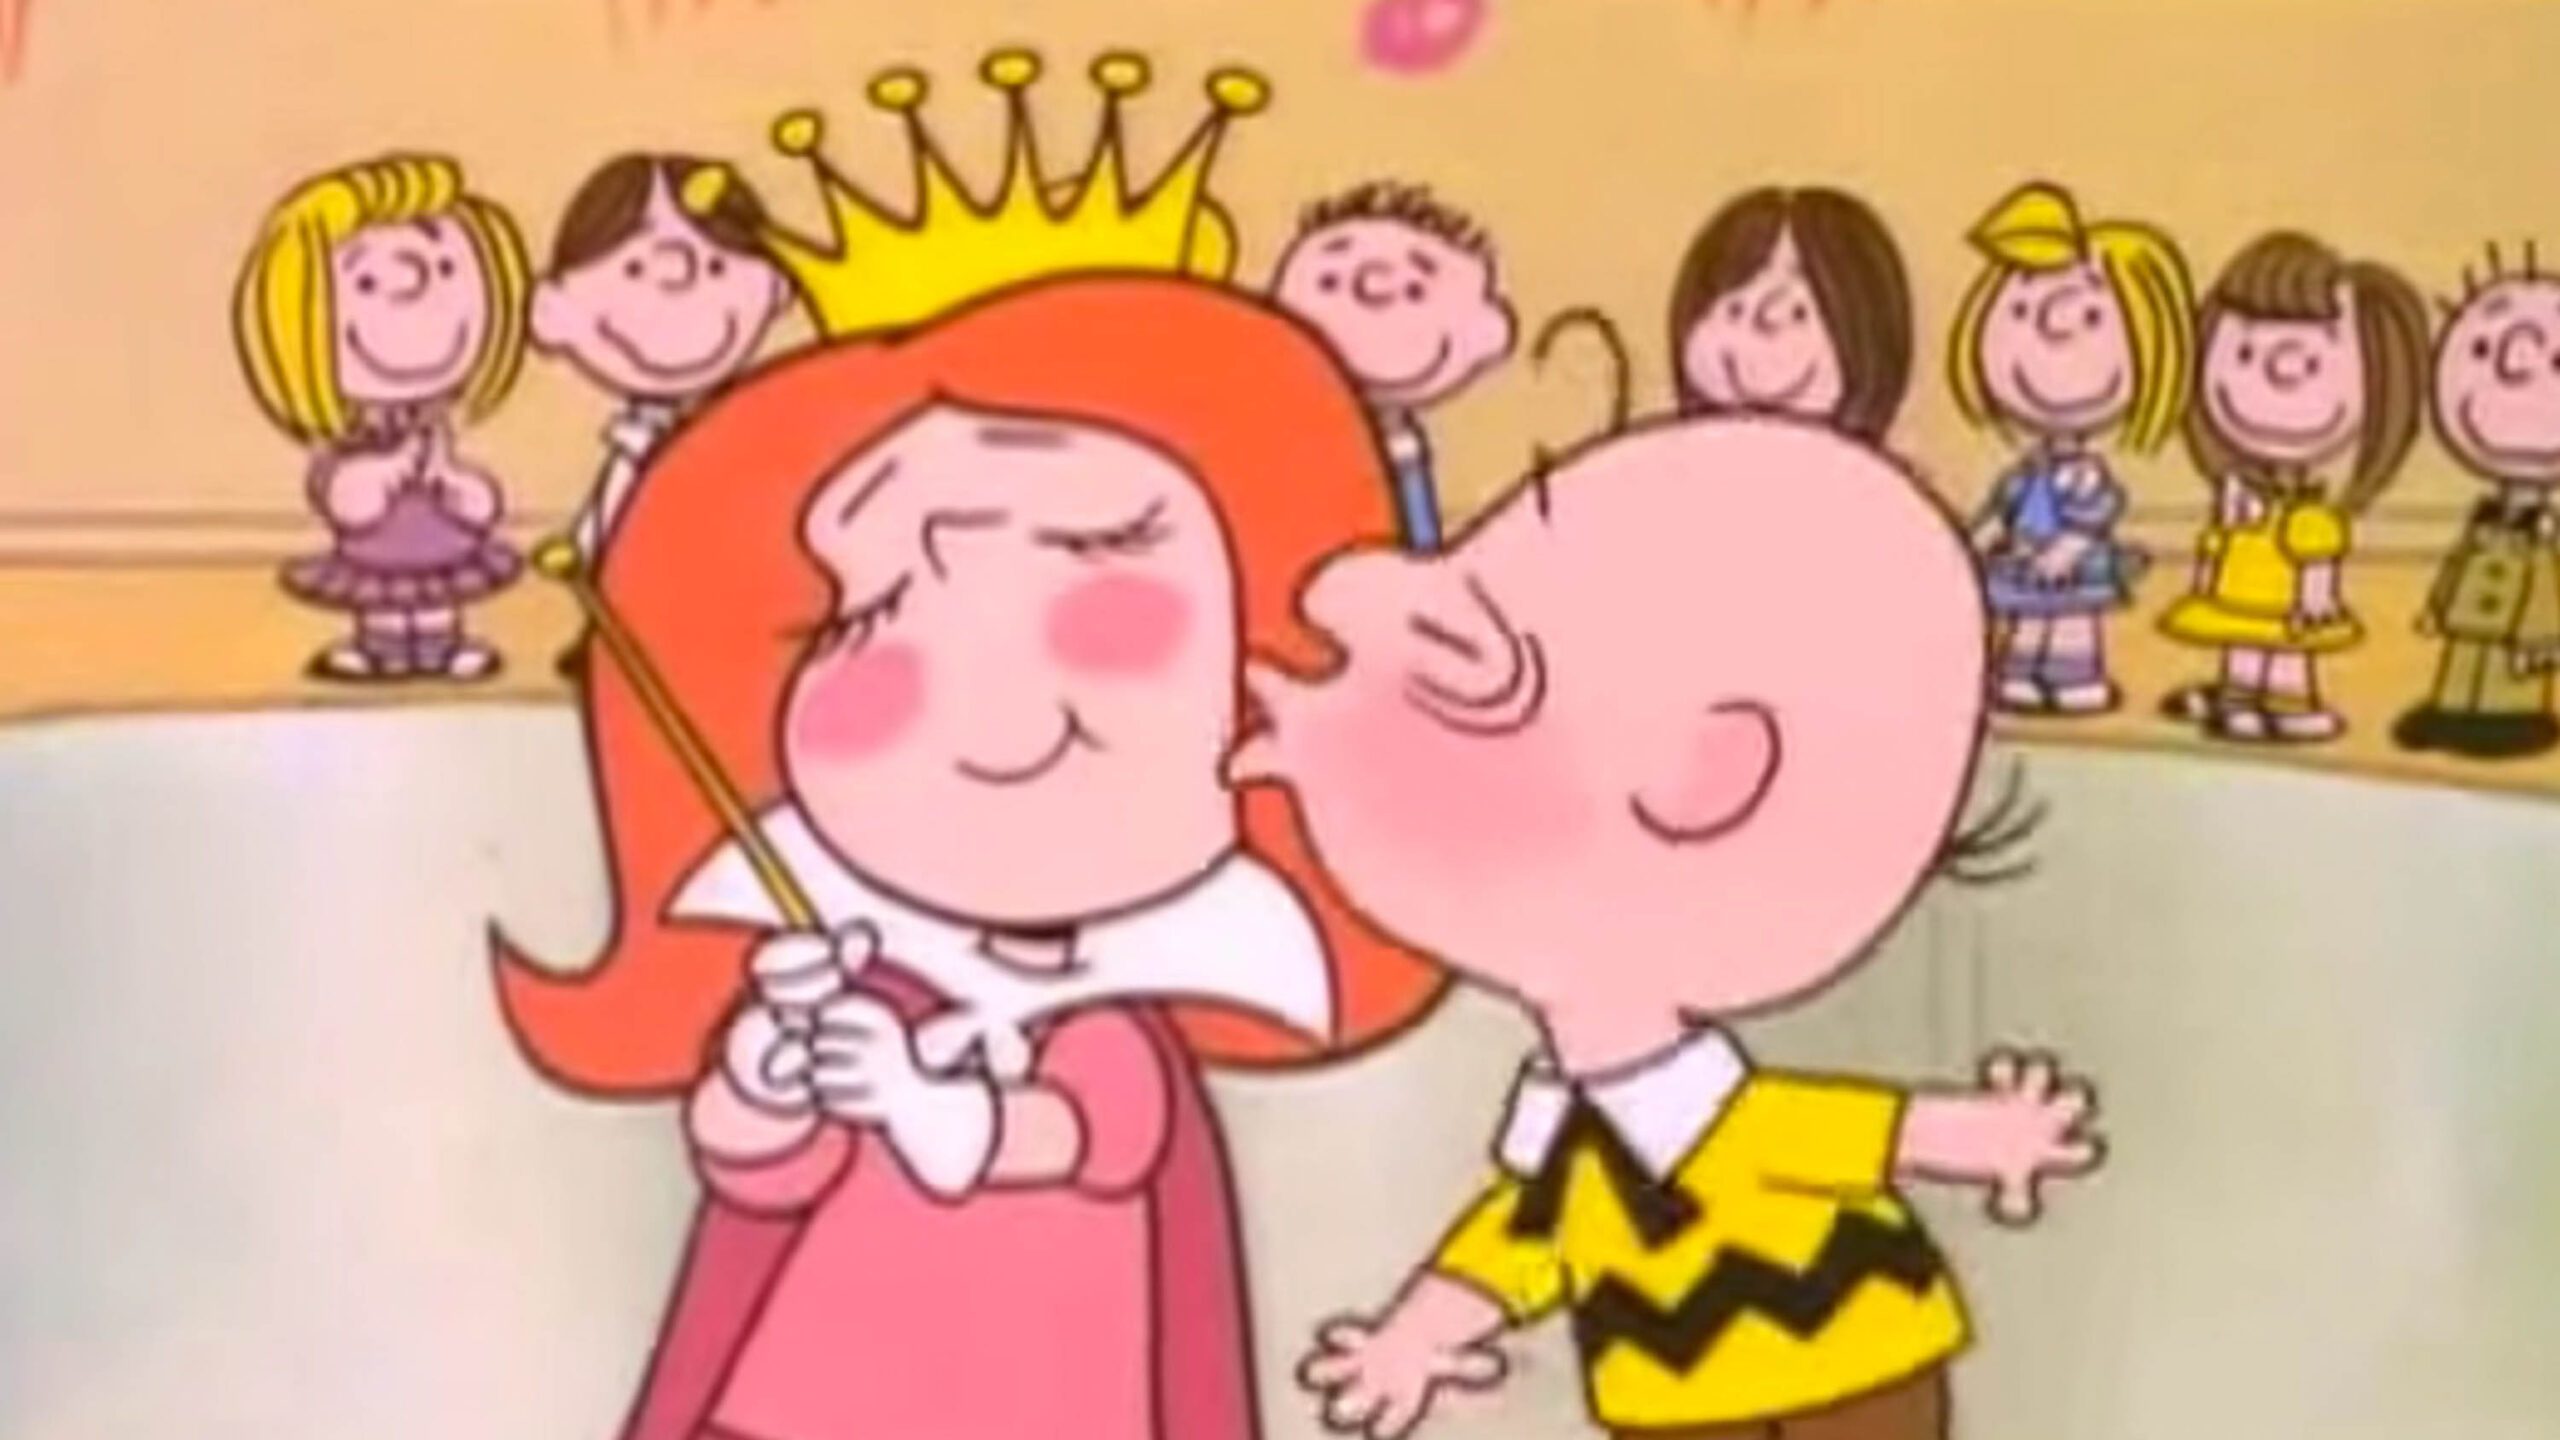 Inspiration for Peanuts’ ‘Little Red-Haired Girl’ dies – US media